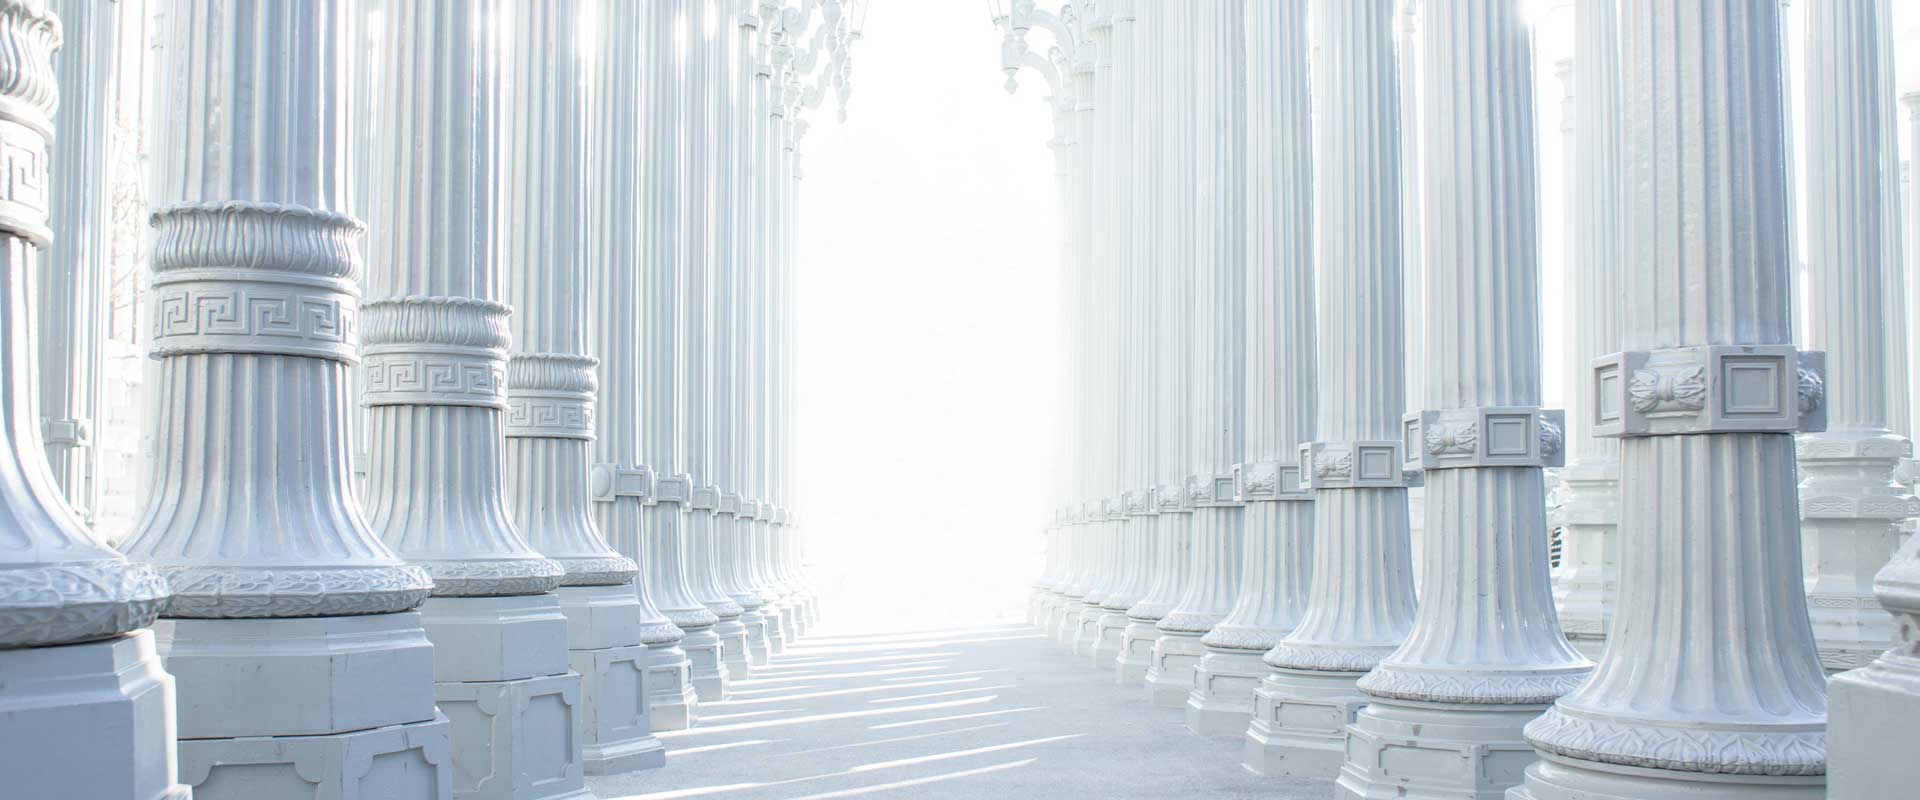 many rows of white pillars with bright white light in the distance